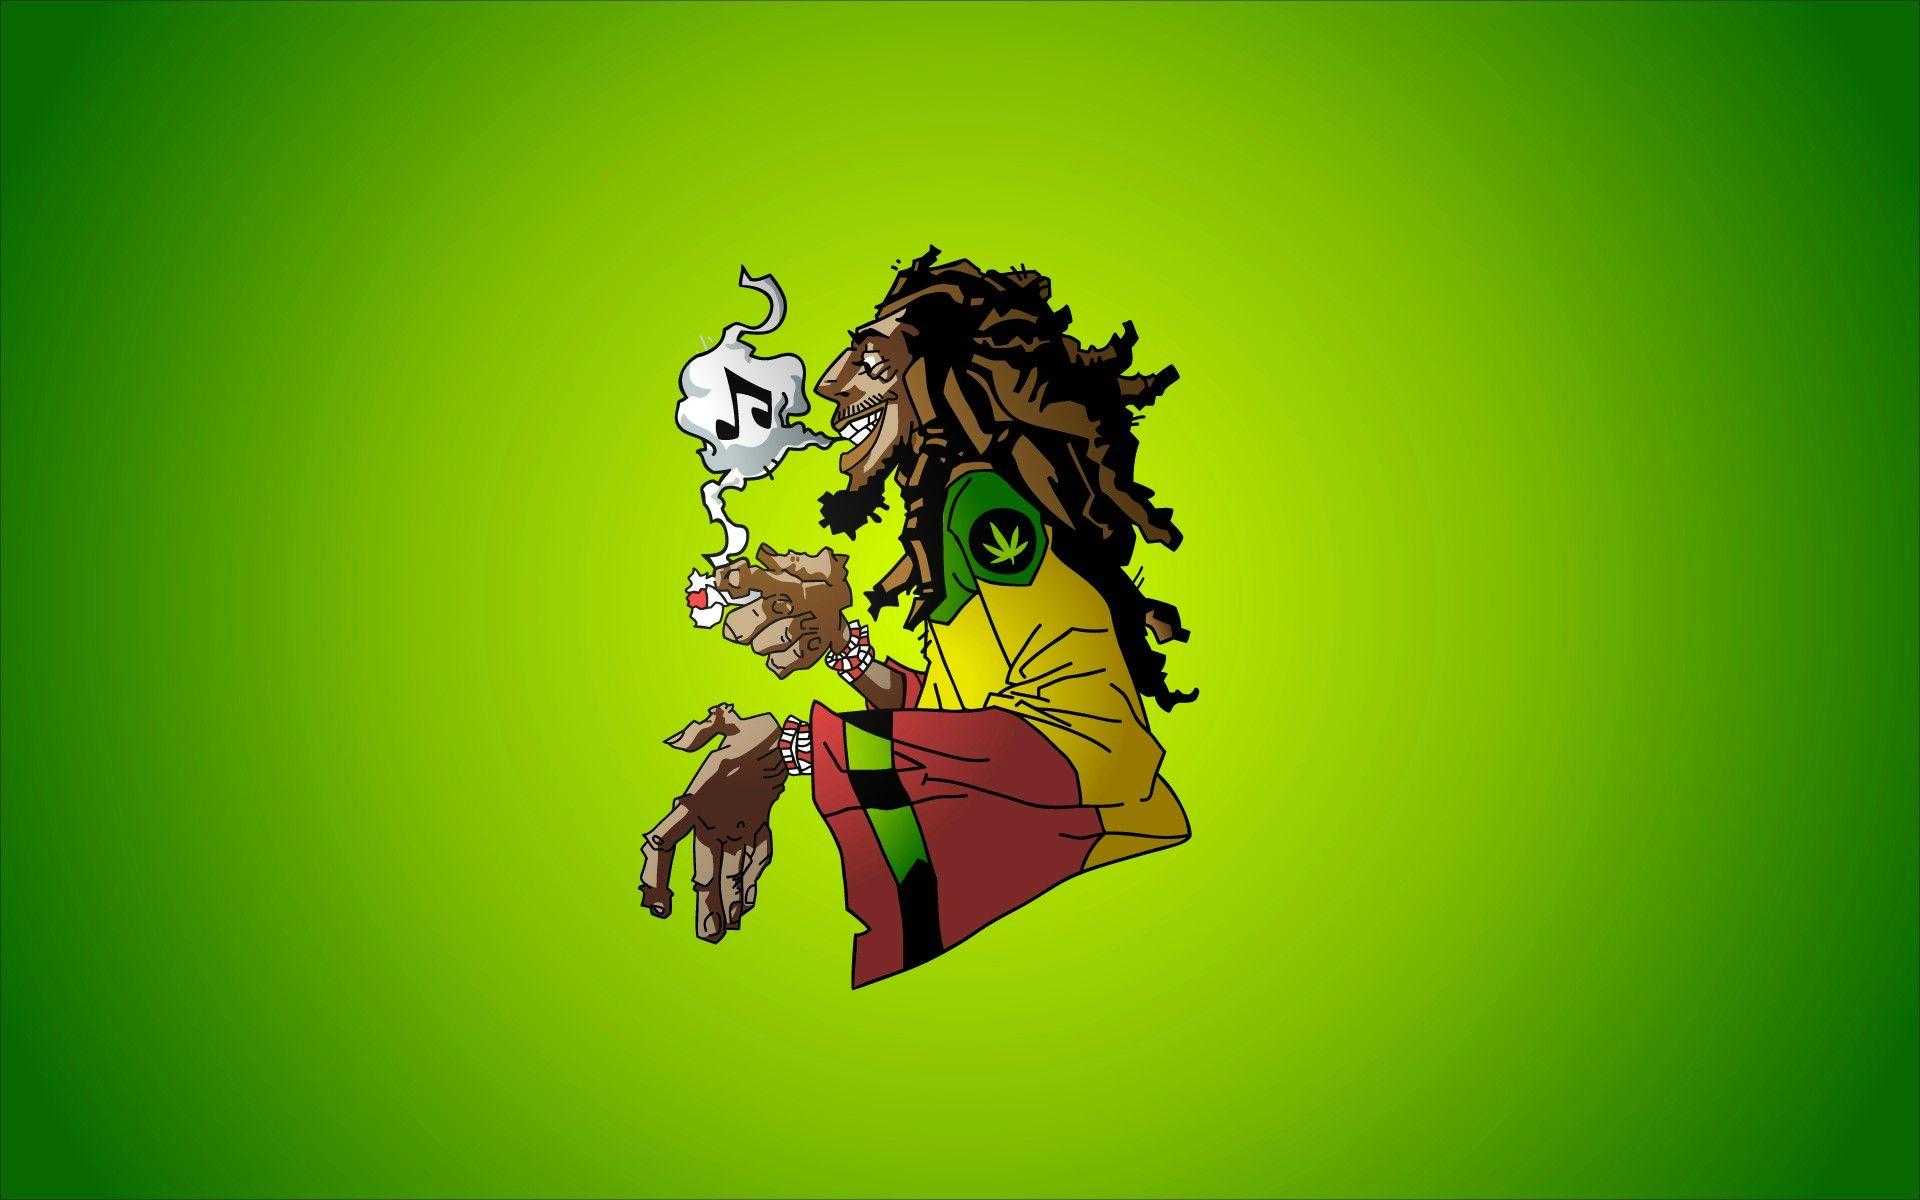 Weed Wallpaper - NawPic